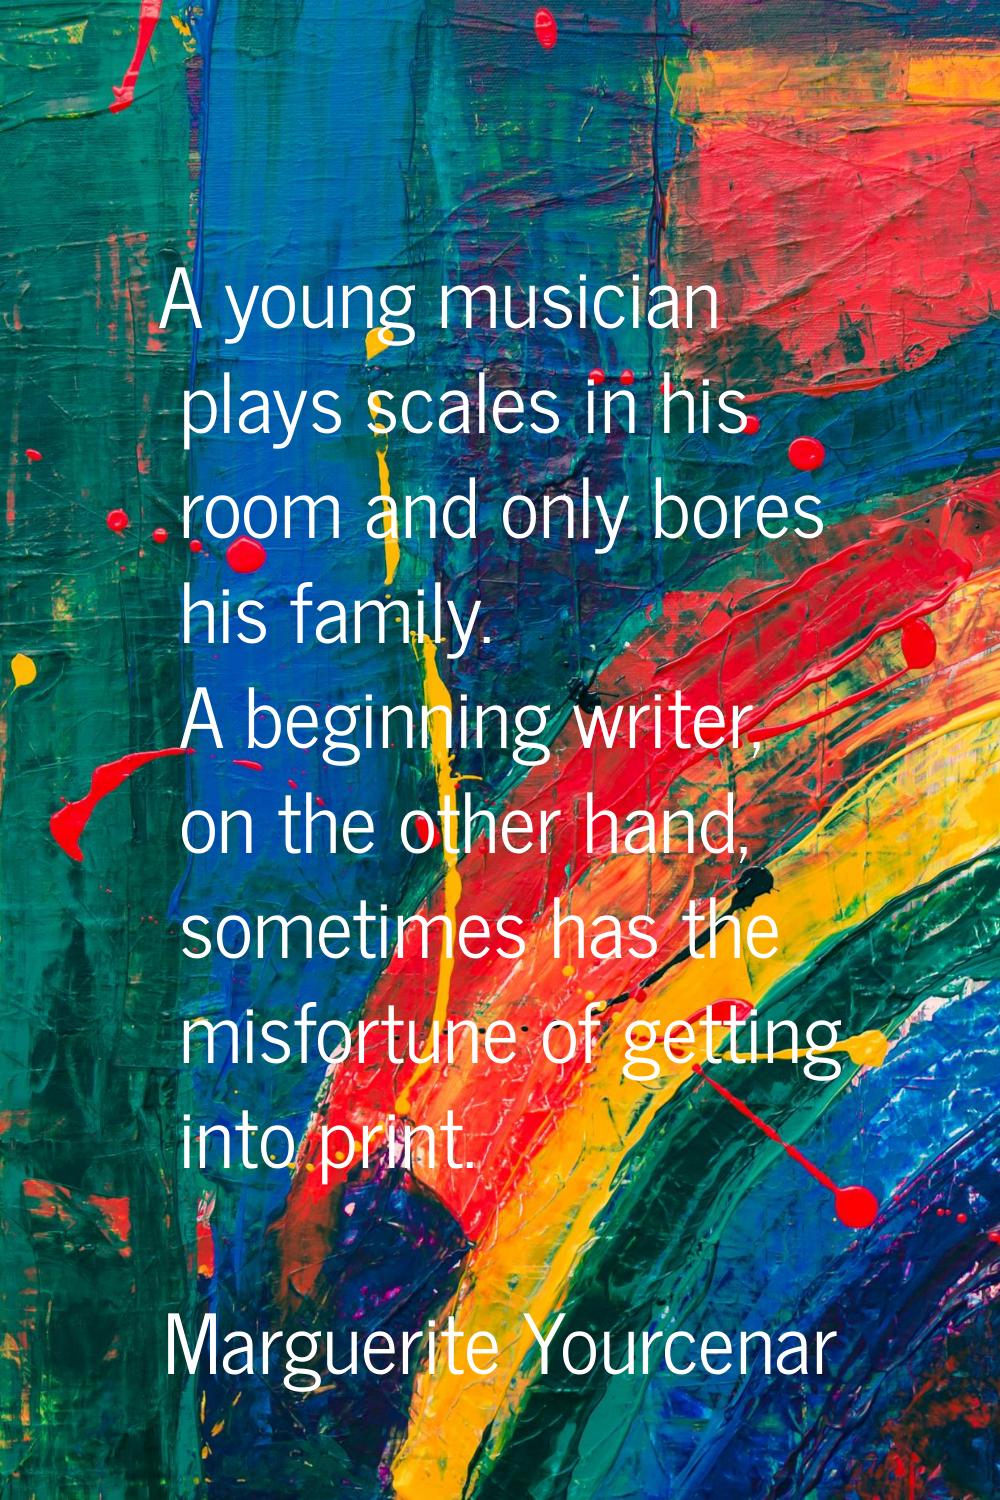 A young musician plays scales in his room and only bores his family. A beginning writer, on the oth